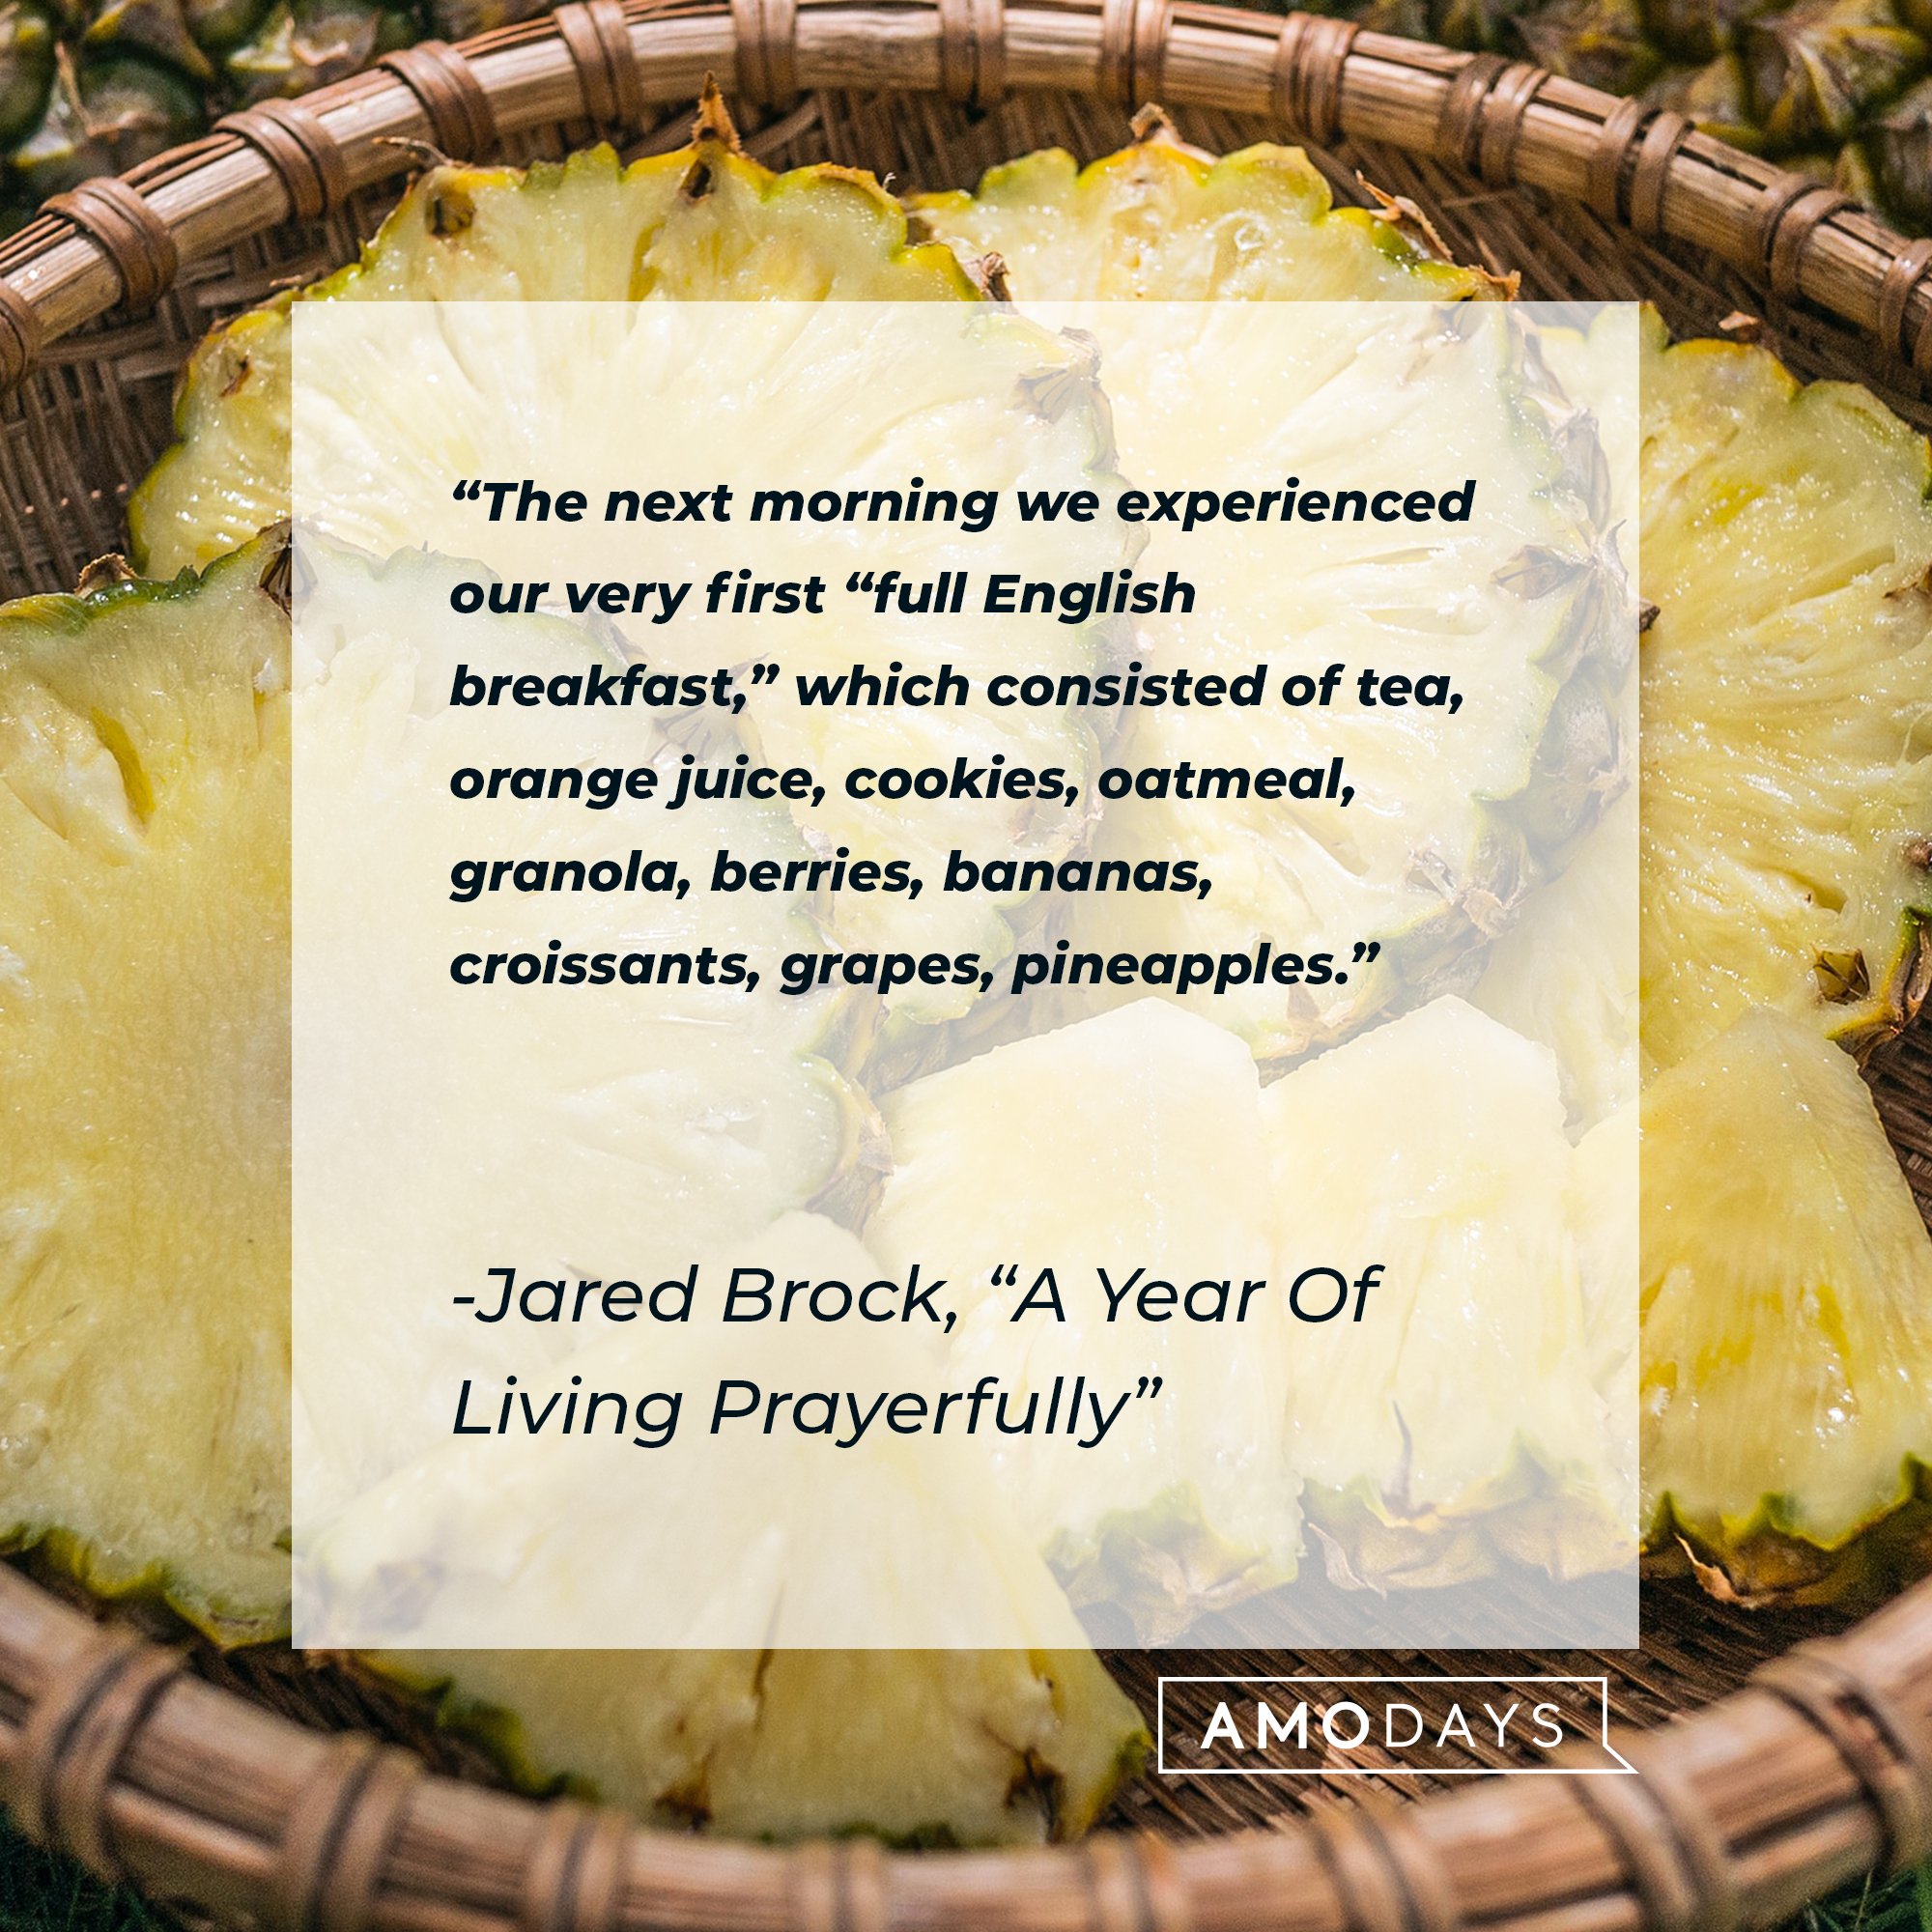 Jared Brock's "A Year Of Living Prayerfully" quote: "The next morning we experienced our very first "full English breakfast," which consisted of tea, orange juice, cookies, oatmeal, granola, berries, bananas, croissants, grapes, pineapples." | Image: AmoDays